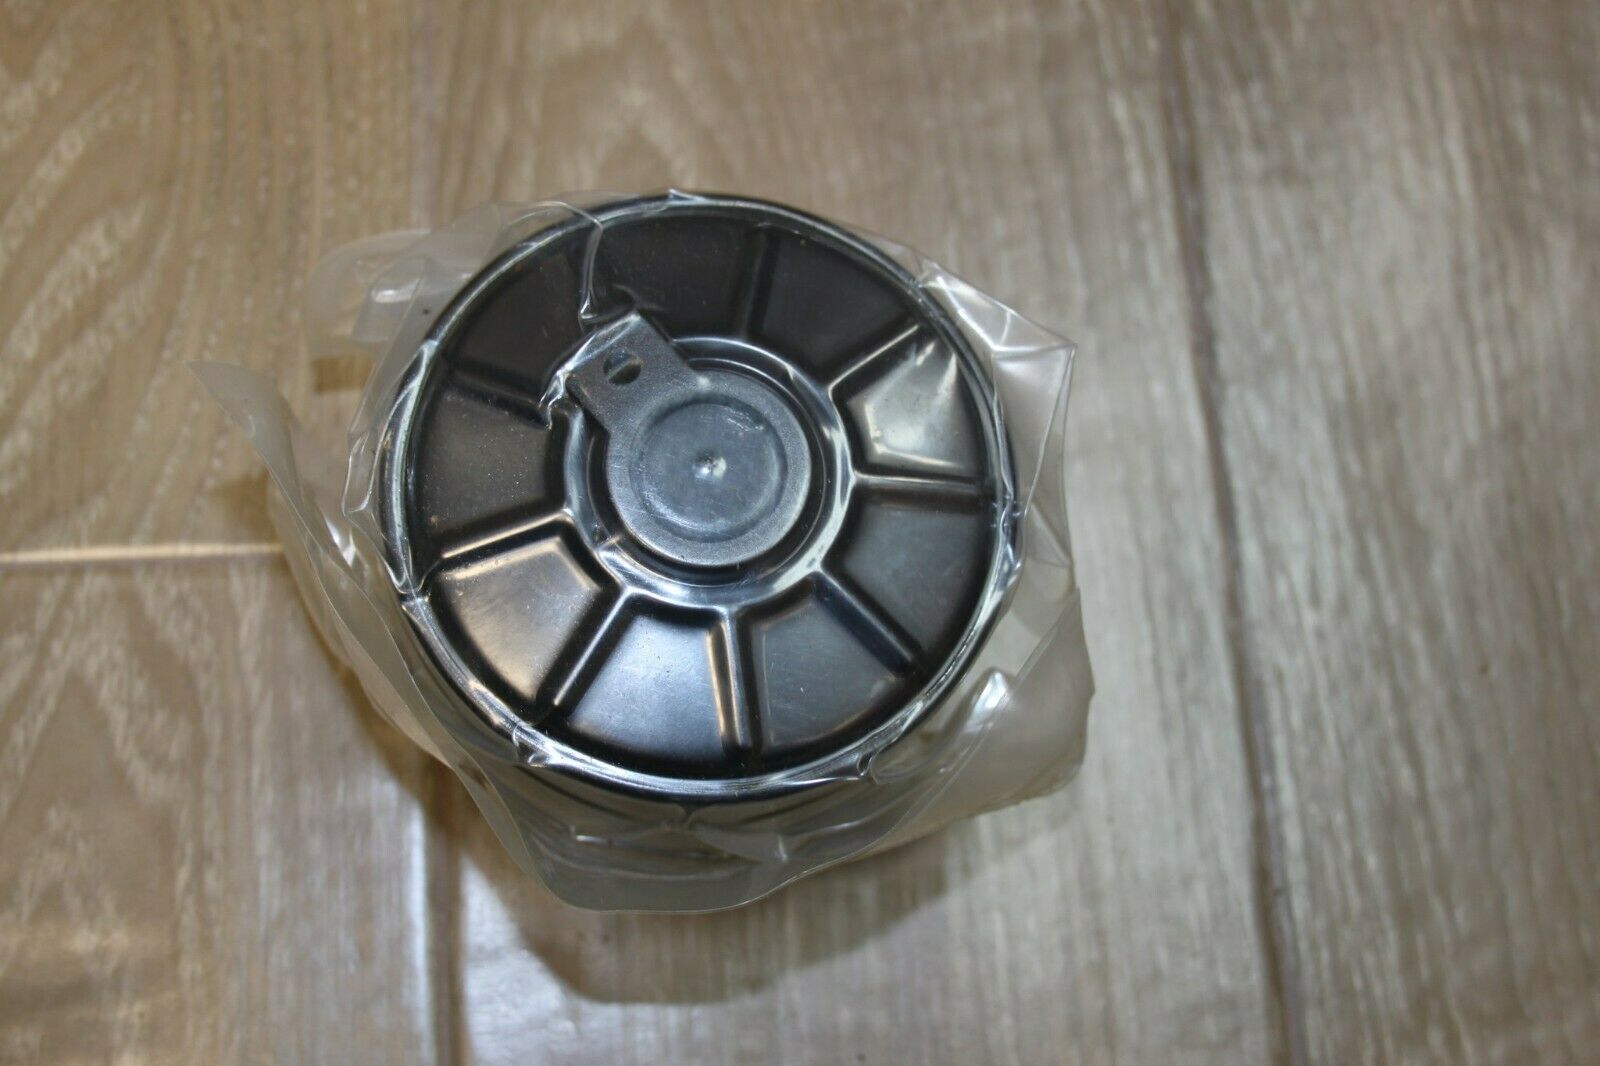 NEW LARGE SIZE FILTER FOR THE 40MM THREADED NATO GAS MASK FITS ISRAELI AND MP5